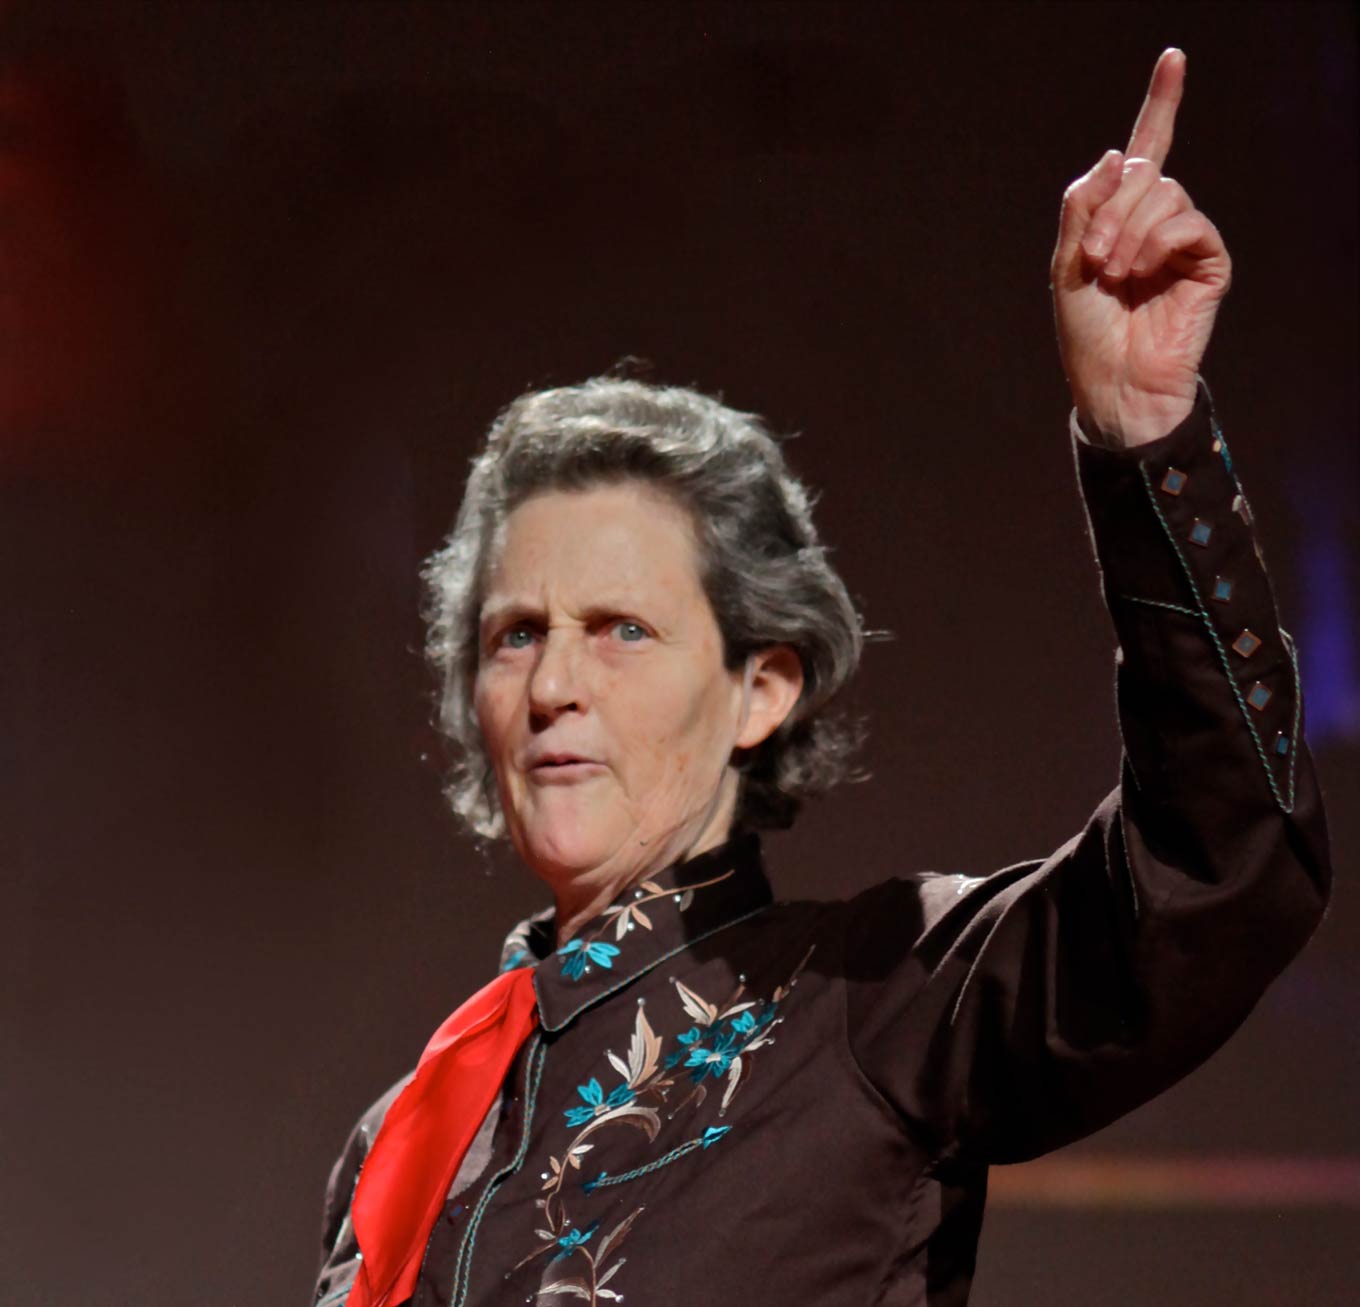 Temple Grandin speaking on stage at TED conference